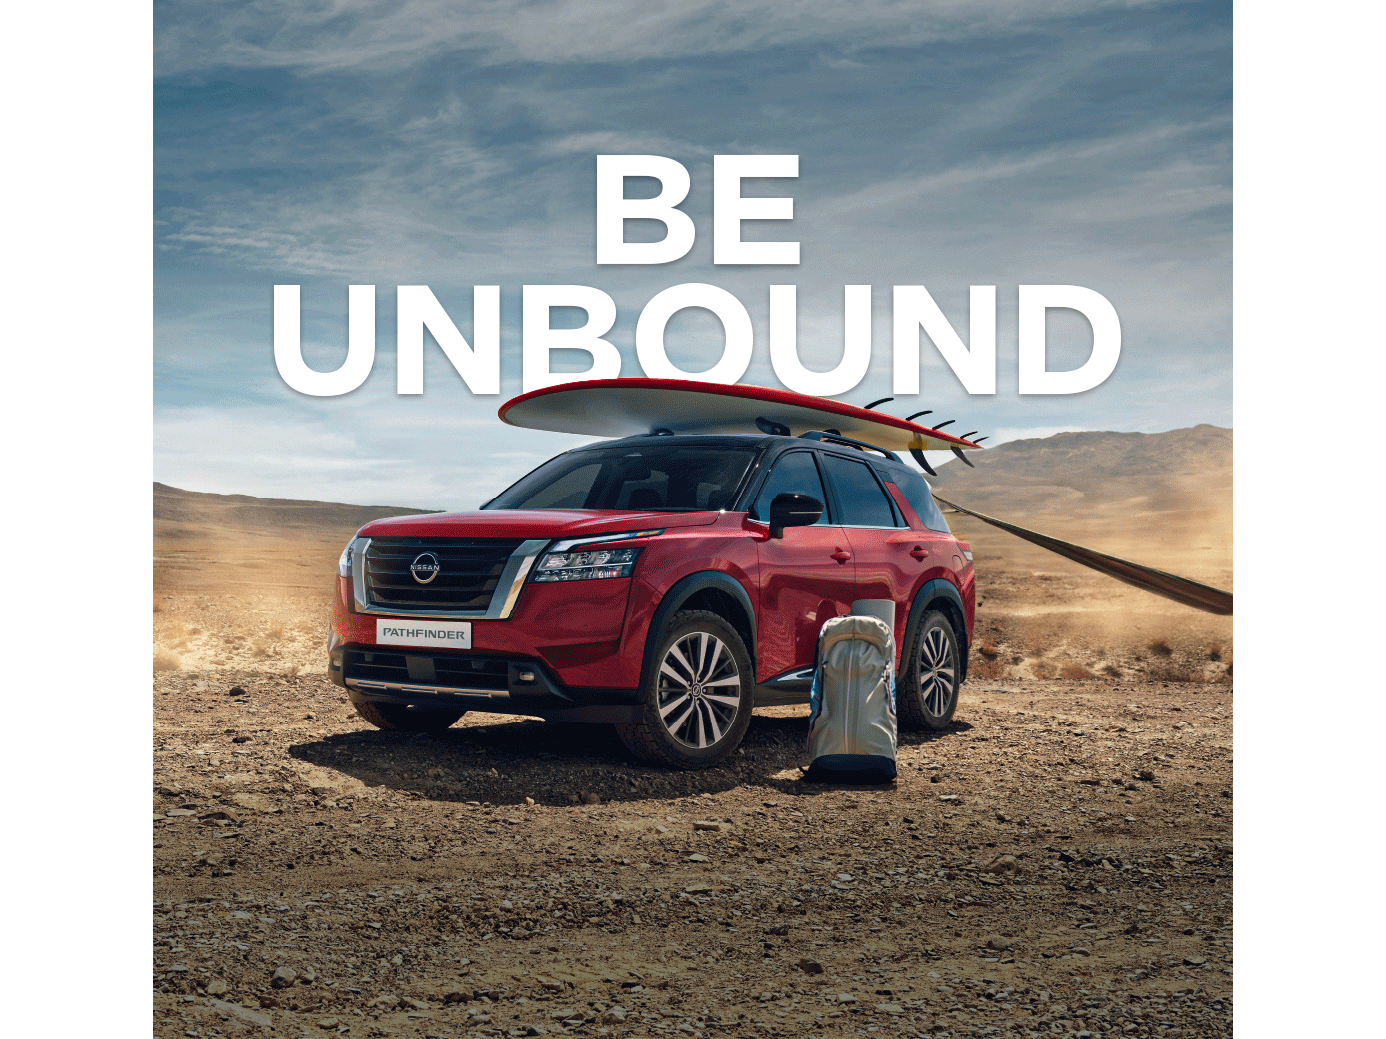 Nissan’s Be Unbound campaign invites people to follow their true passions by applying for the dream job sabbatical